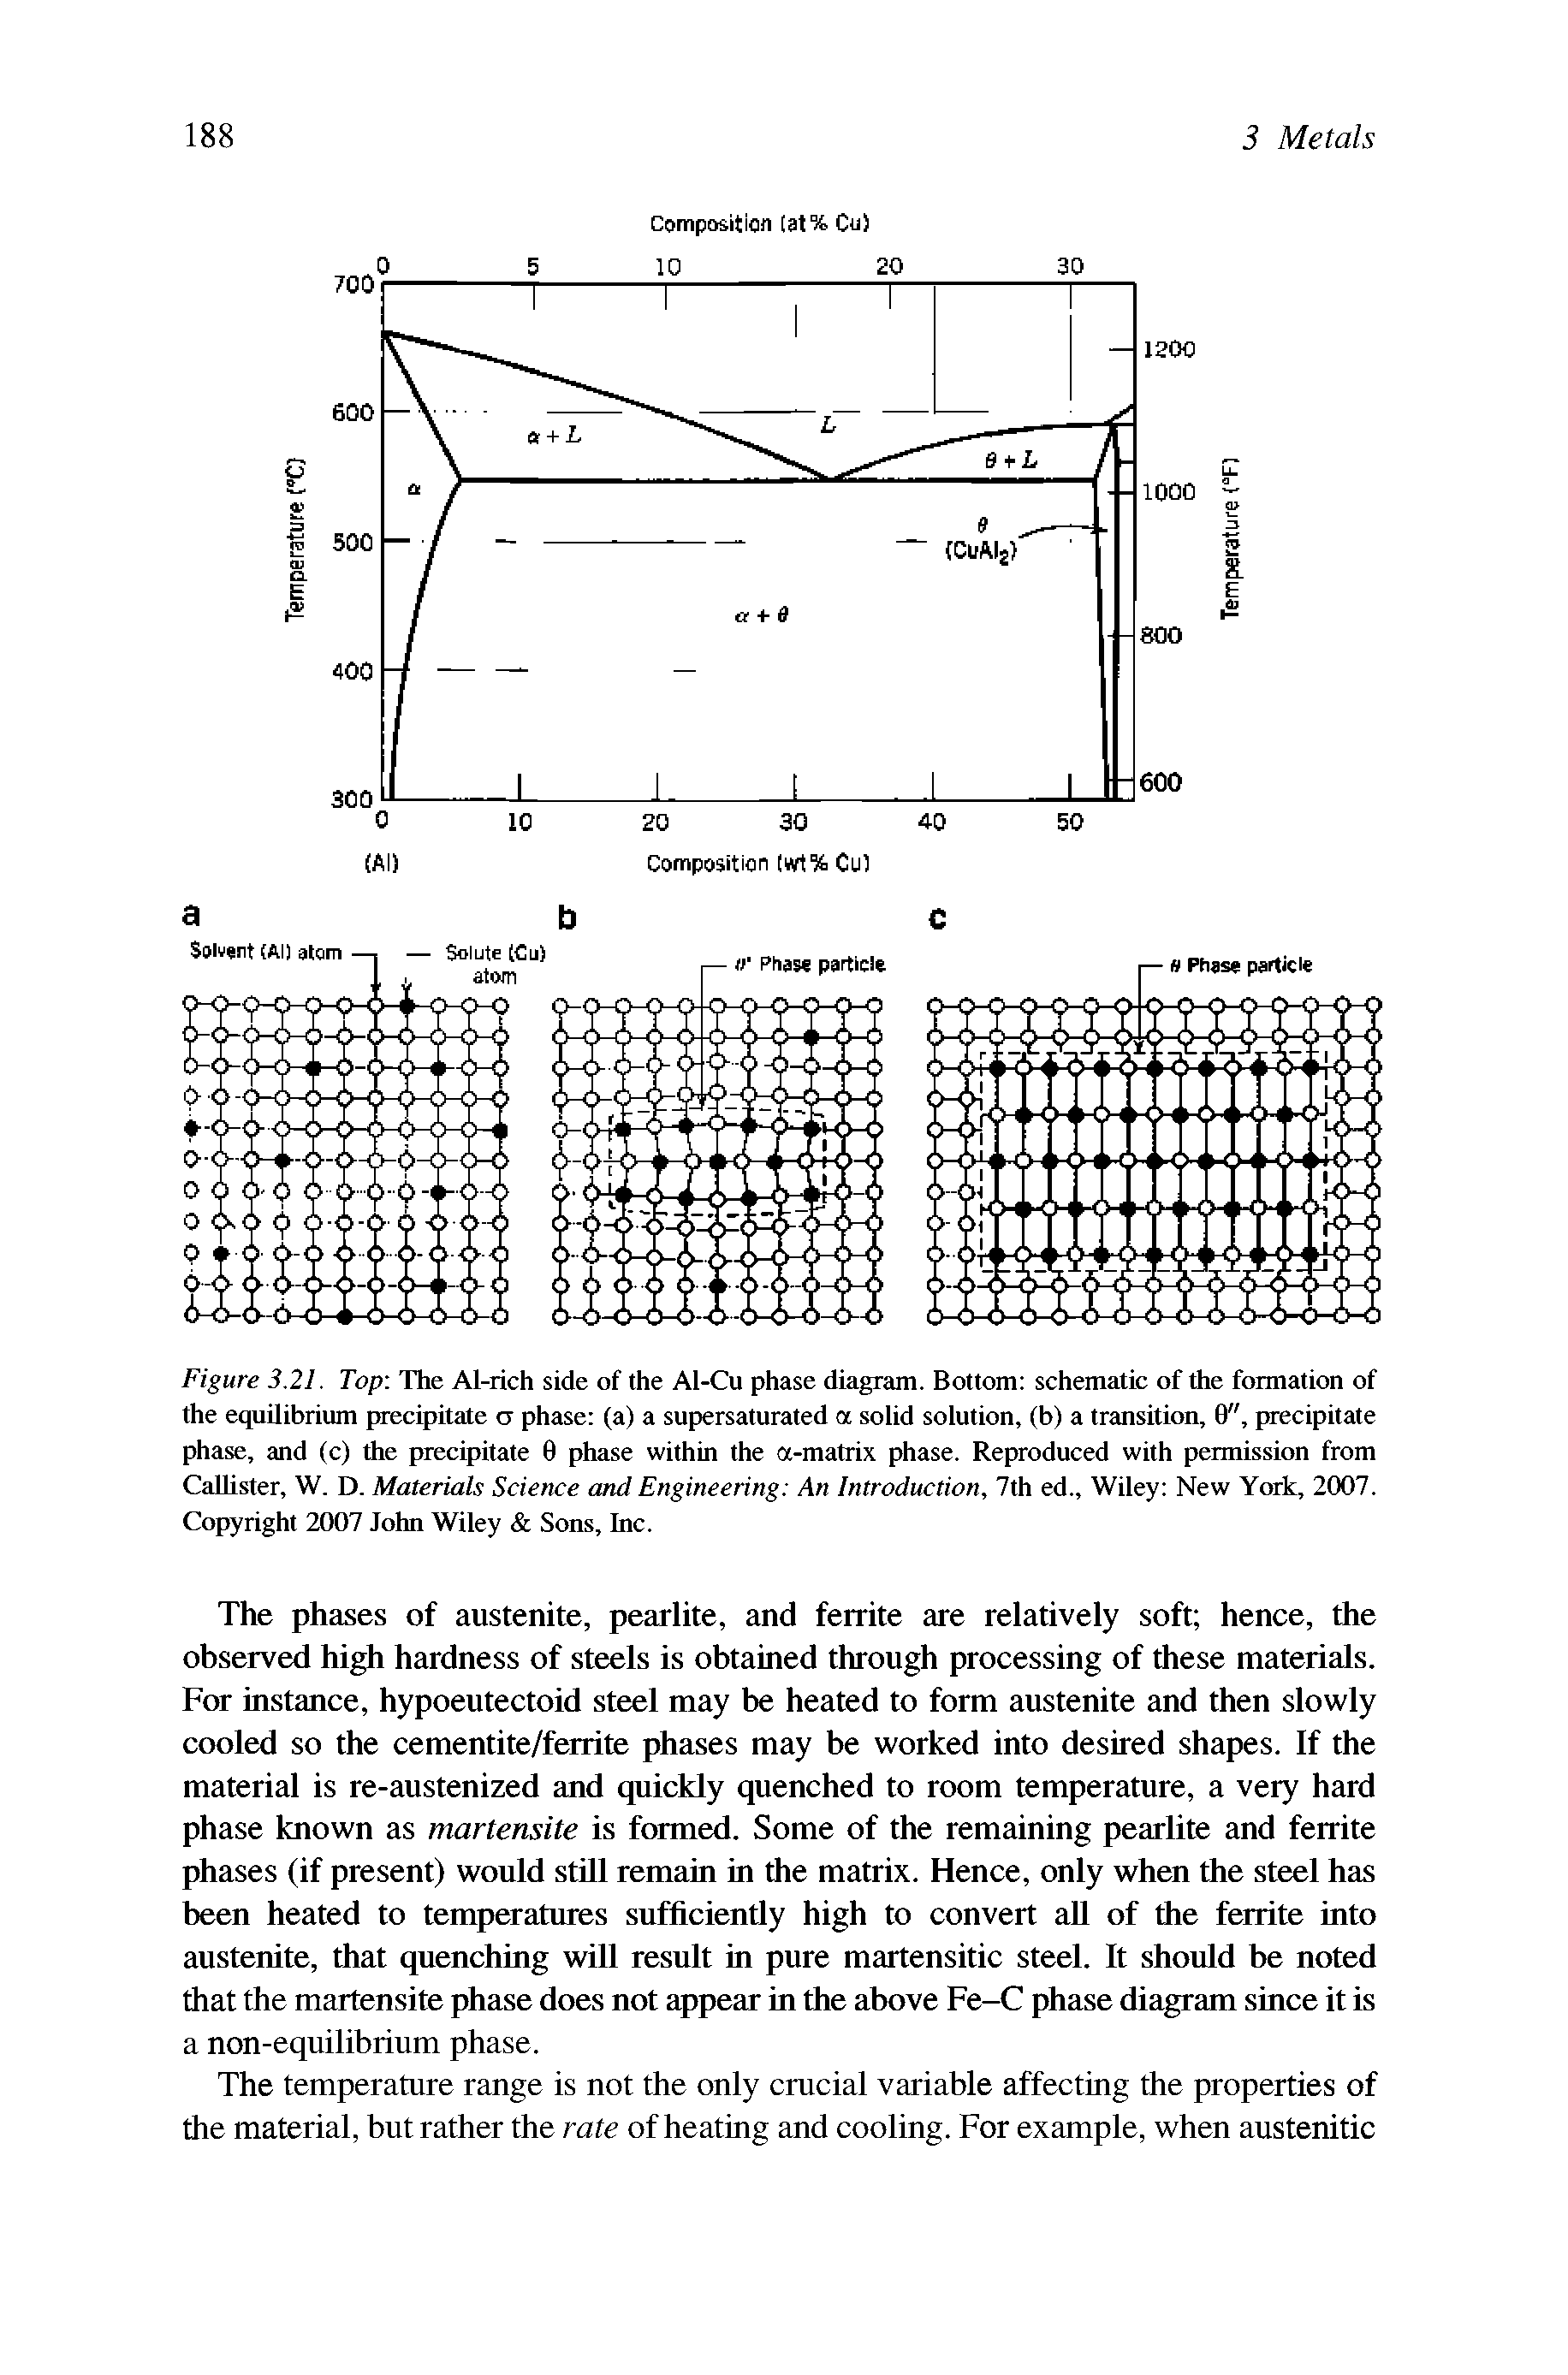 Figure 3.21. Top The Al-rich side of the Al-Cu phase diagram. Bottom schematic of the formation of the equilibrium precipitate o phase (a) a supersaturated a solid solution, (b) a transition, 0", precipitate phase, and (c) the precipitate 0 phase within the a-matrix phase. Reproduced with permission from CaUister, W. D. Materials Science and Engineering An Introduction, 7th ed., Wiley New York, 2007. Copyright 2007 John Wiley Sons, Inc.